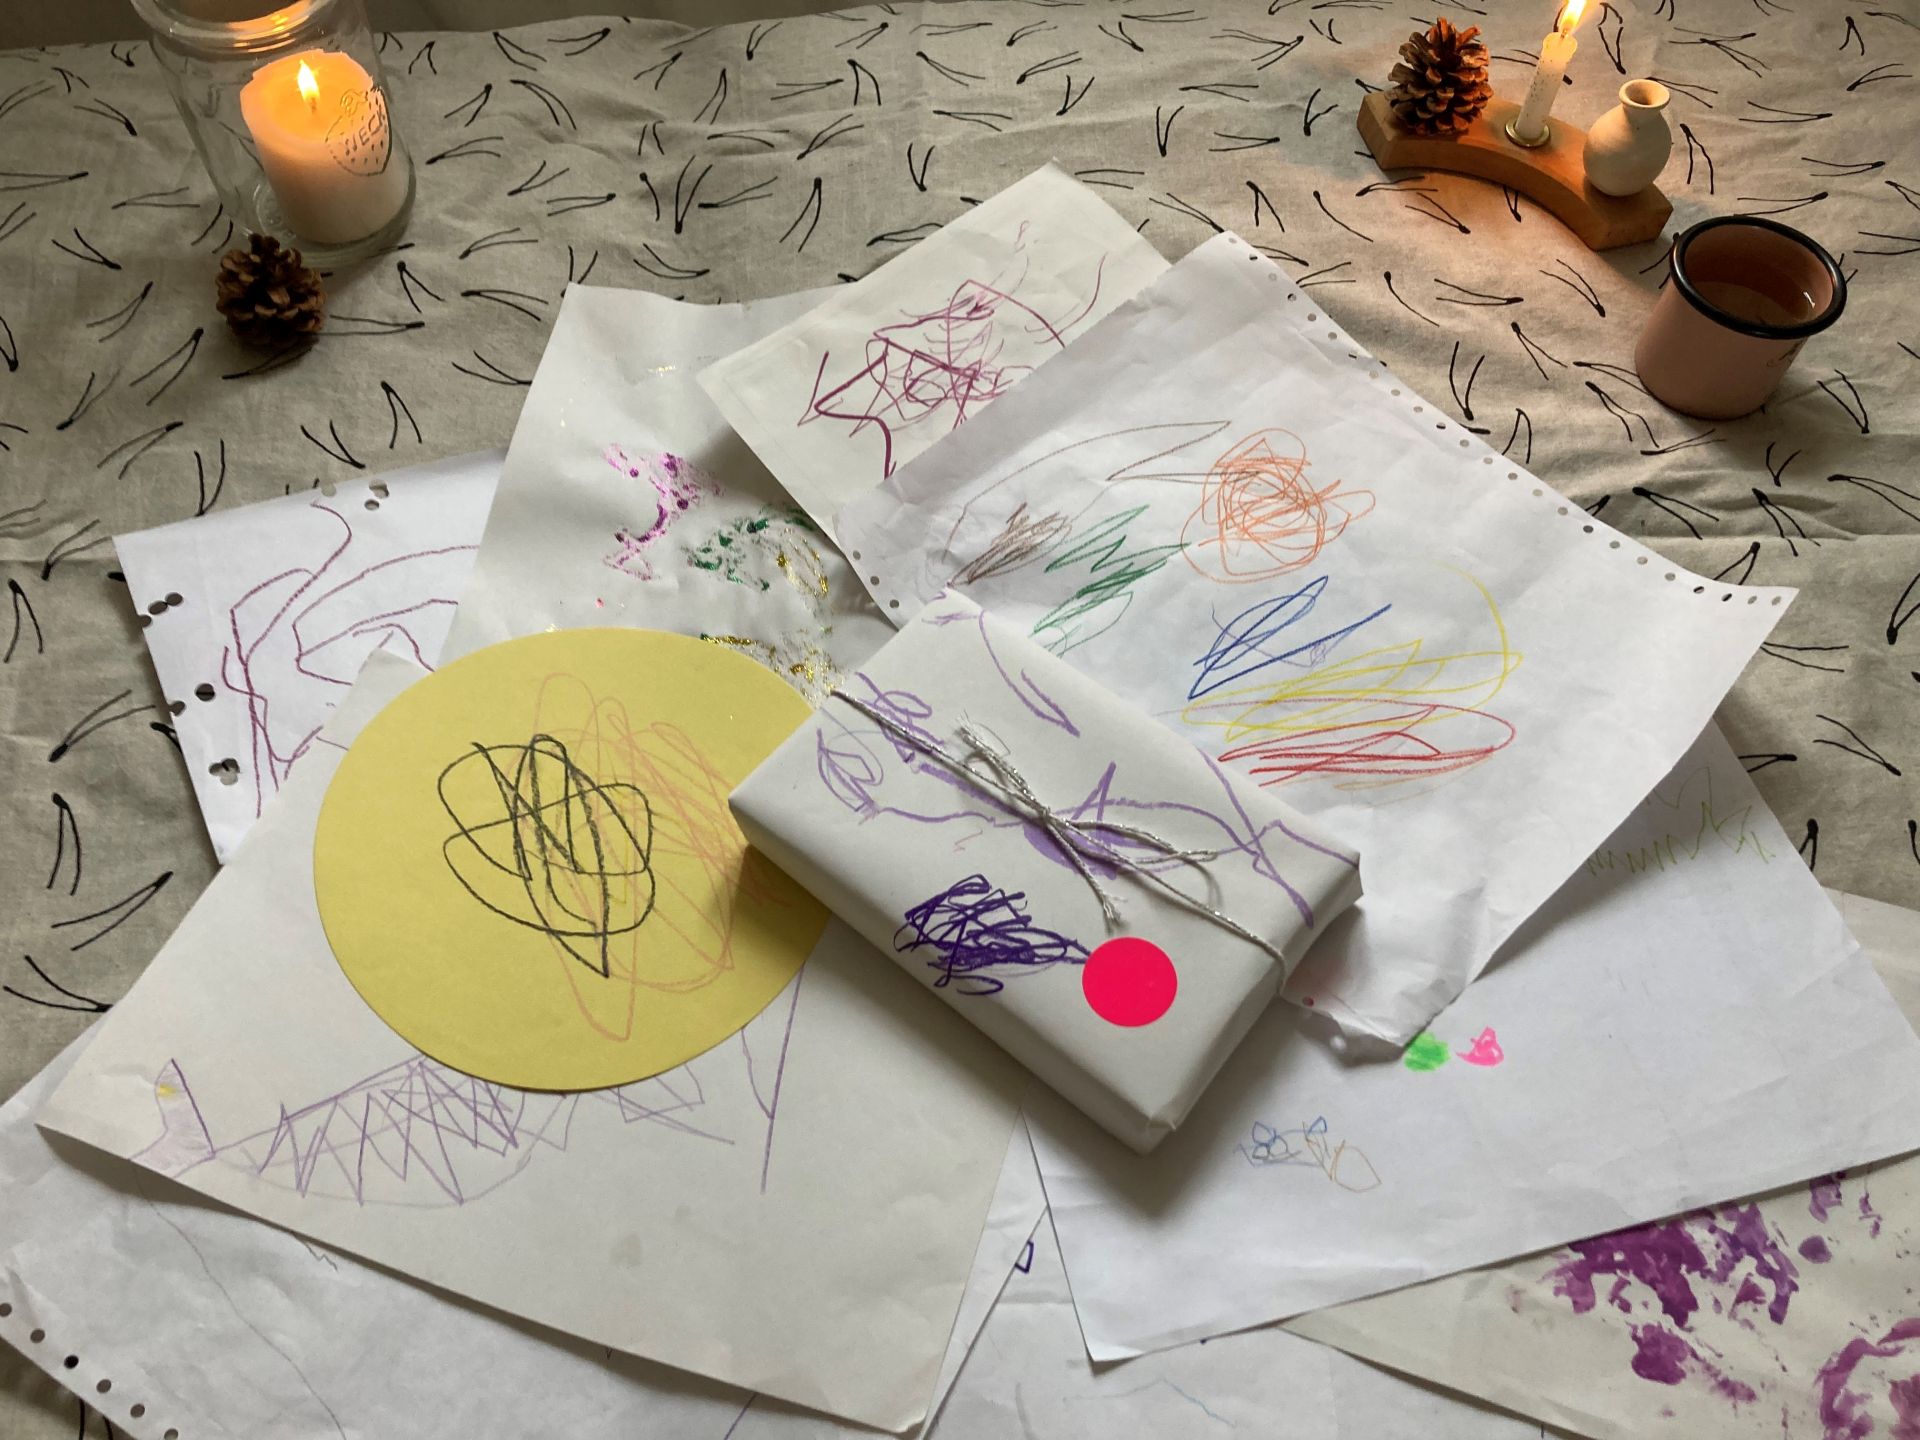 Wrapping gifts sustainably, children's art